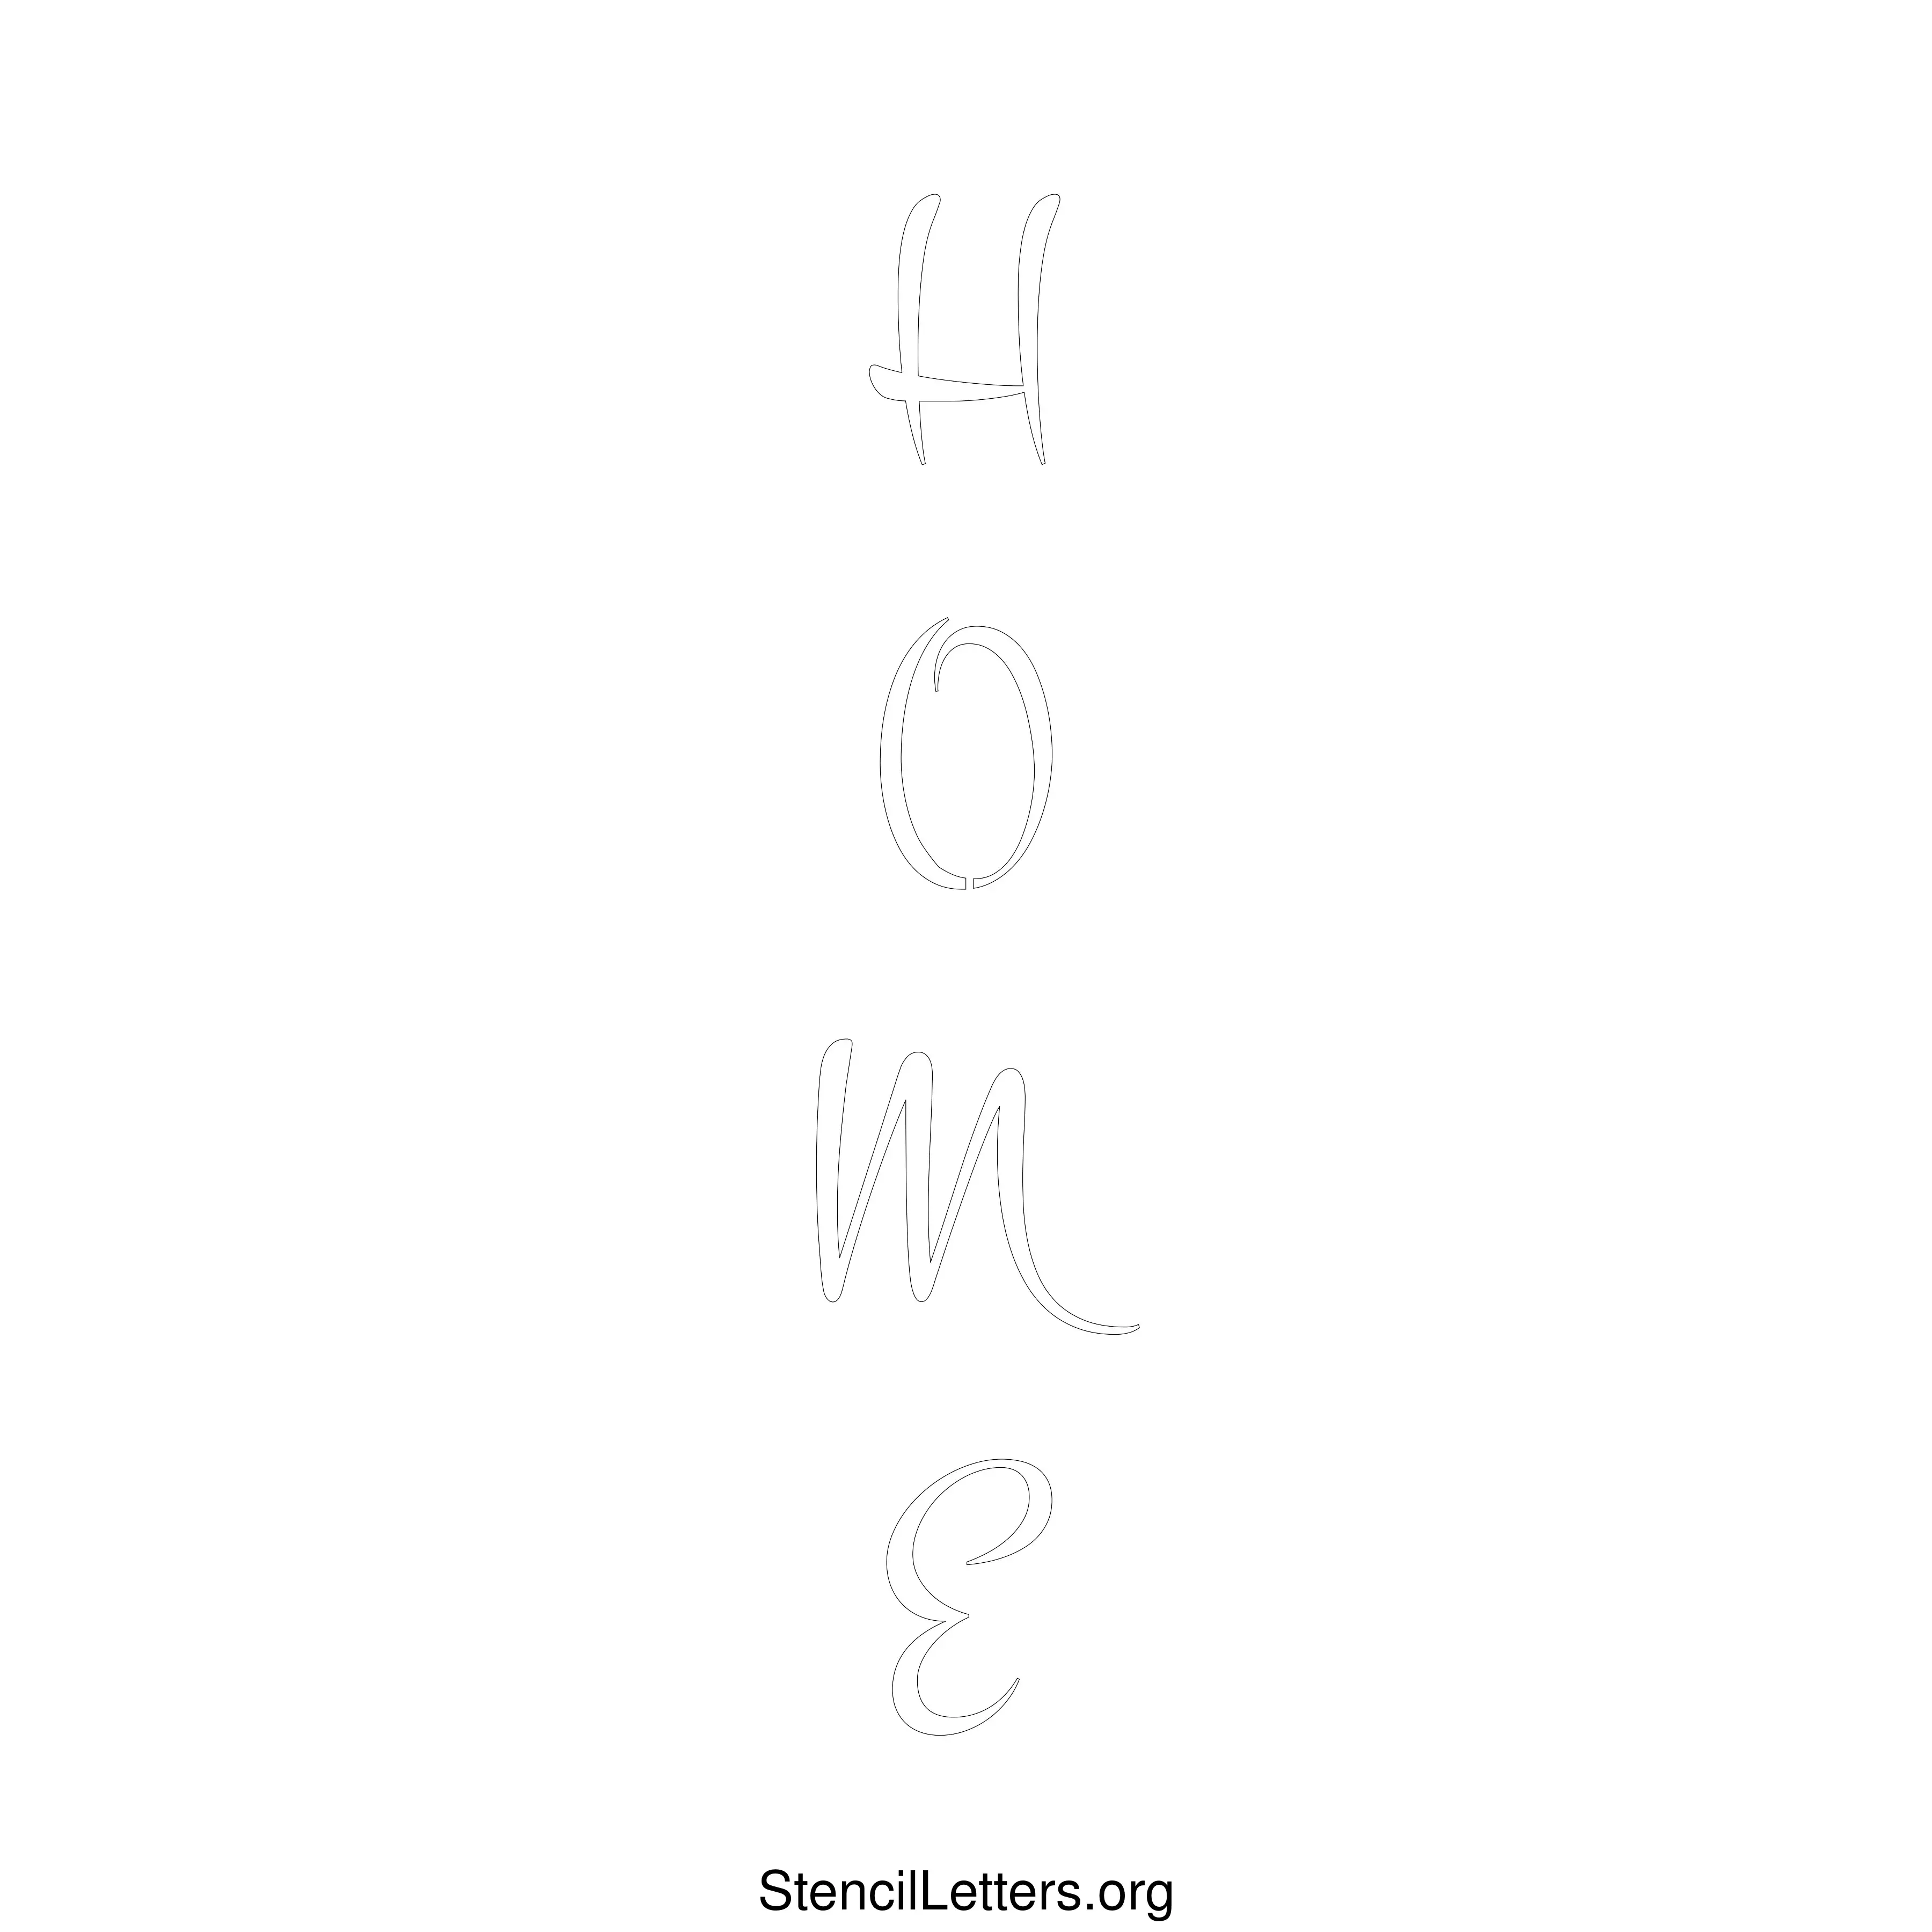 Home Stenciling Template - 12x12 Inch DIY Printable Craft Letter Stencils